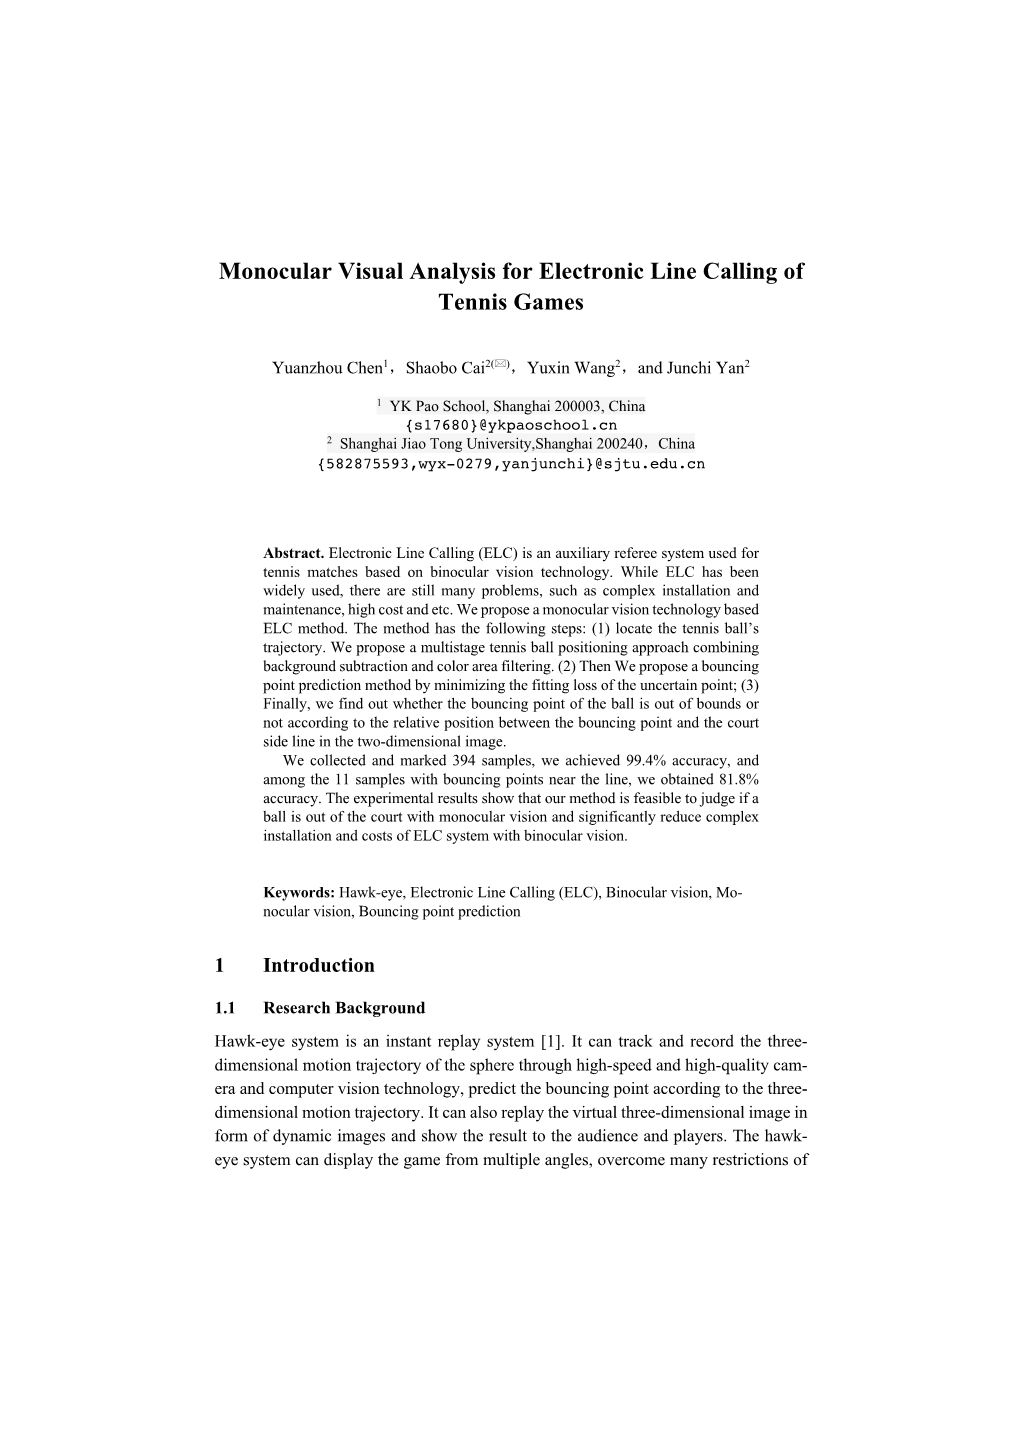 Monocular Visual Analysis for Electronic Line Calling of Tennis Games